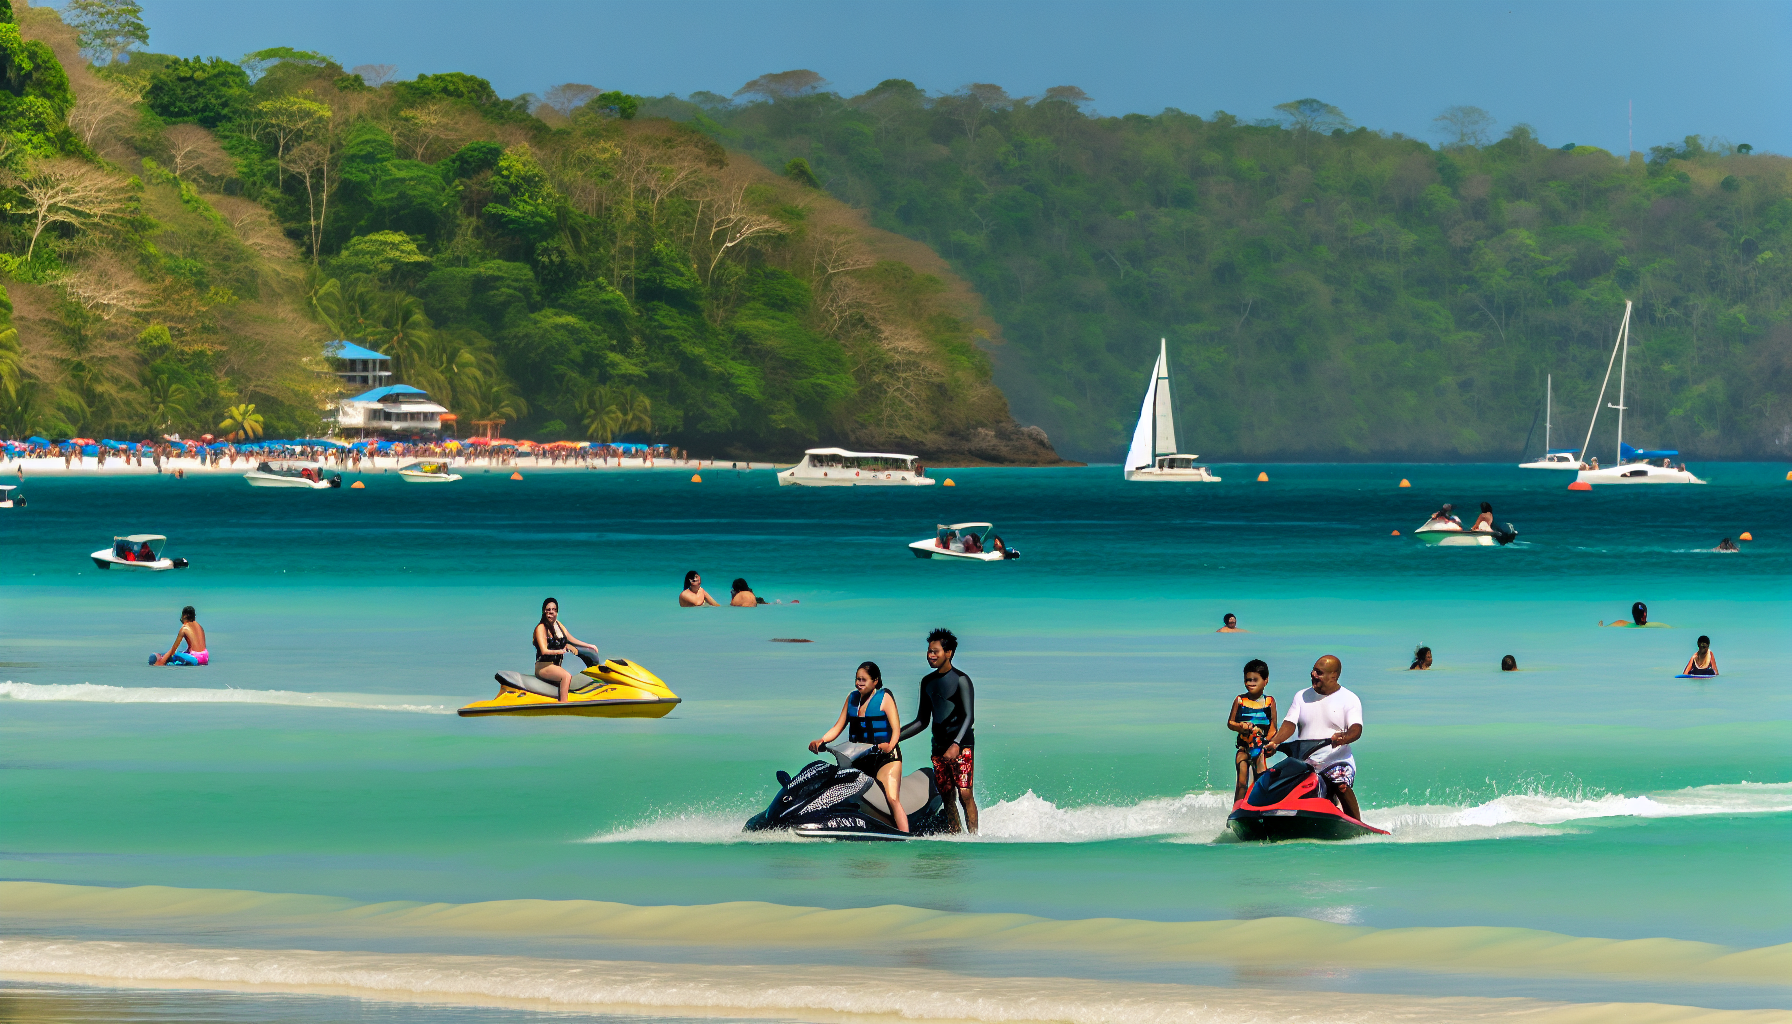 Family enjoying water sports at Playa Panama with boats and clear blue waters